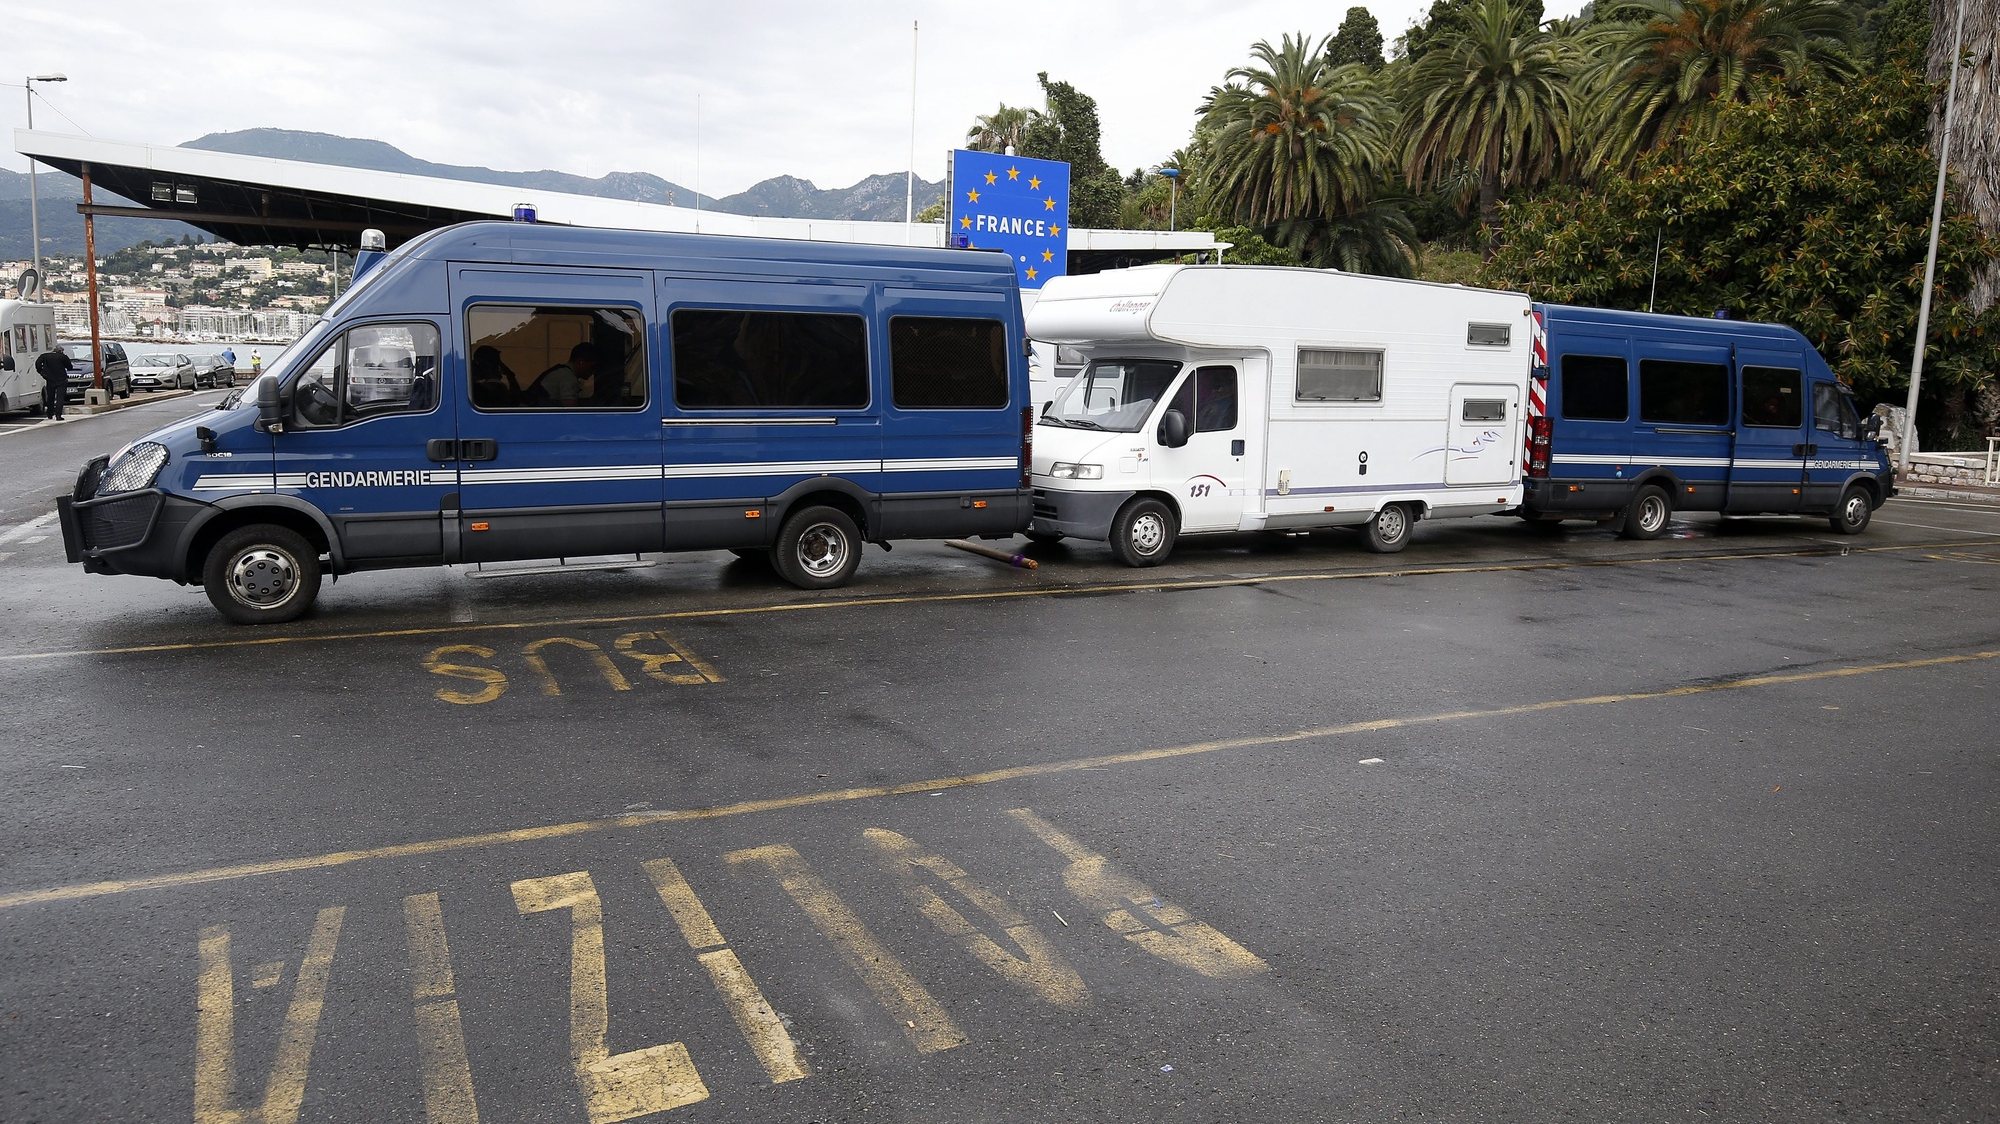 epa04798638 French police vehicles are parked to  block the French border against stranded migrants waiting to cross at the Franco-Italian border near Menton, southern France, 14 June 2015. More than 150 migrants who wished to cross the border have been blocked by the French and Italian police. The European Commission proposed in late May that 40,000 asylum seekers be relocated from Italy and Greece over two years. The plan foresees the largest groups of asylum seekers going to Germany and France, based on a calculation involving EU countries&#039; population sizes, unemployment rates, wealth and existing refugee intake rates.  EPA/SEBASTIEN NOGIER